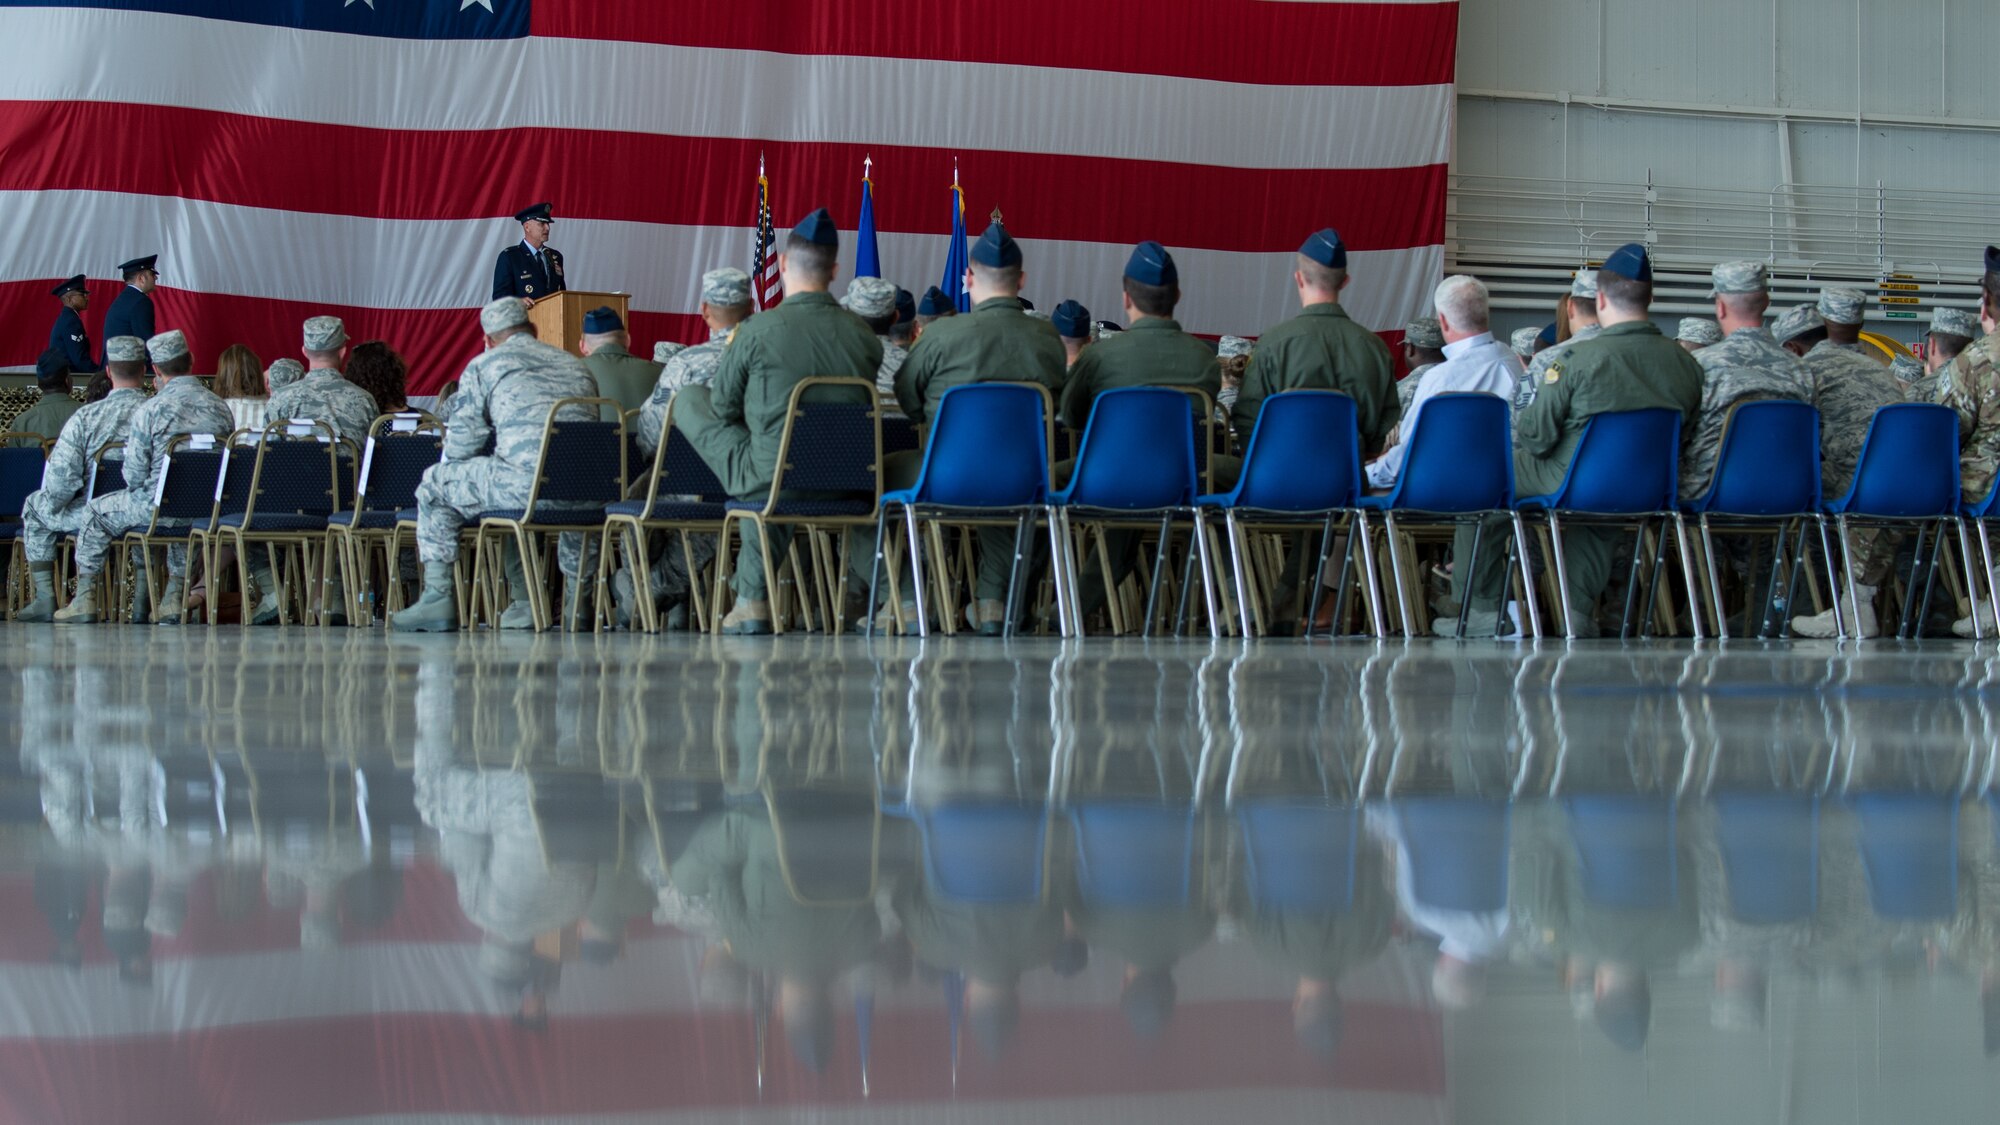 Barksdale Airmen attend the 2nd Bomb Wing change of command ceremony at Barksdale Air Force Base, La. June 18, 2018. Miller, who previously served as director of the Joint-Global Strike Operations Center, Air Force Global Strike Command, assumed command from Col. Ty Neuman. (U.S. Air Force photo by Airman 1st Class Lillian Combes)